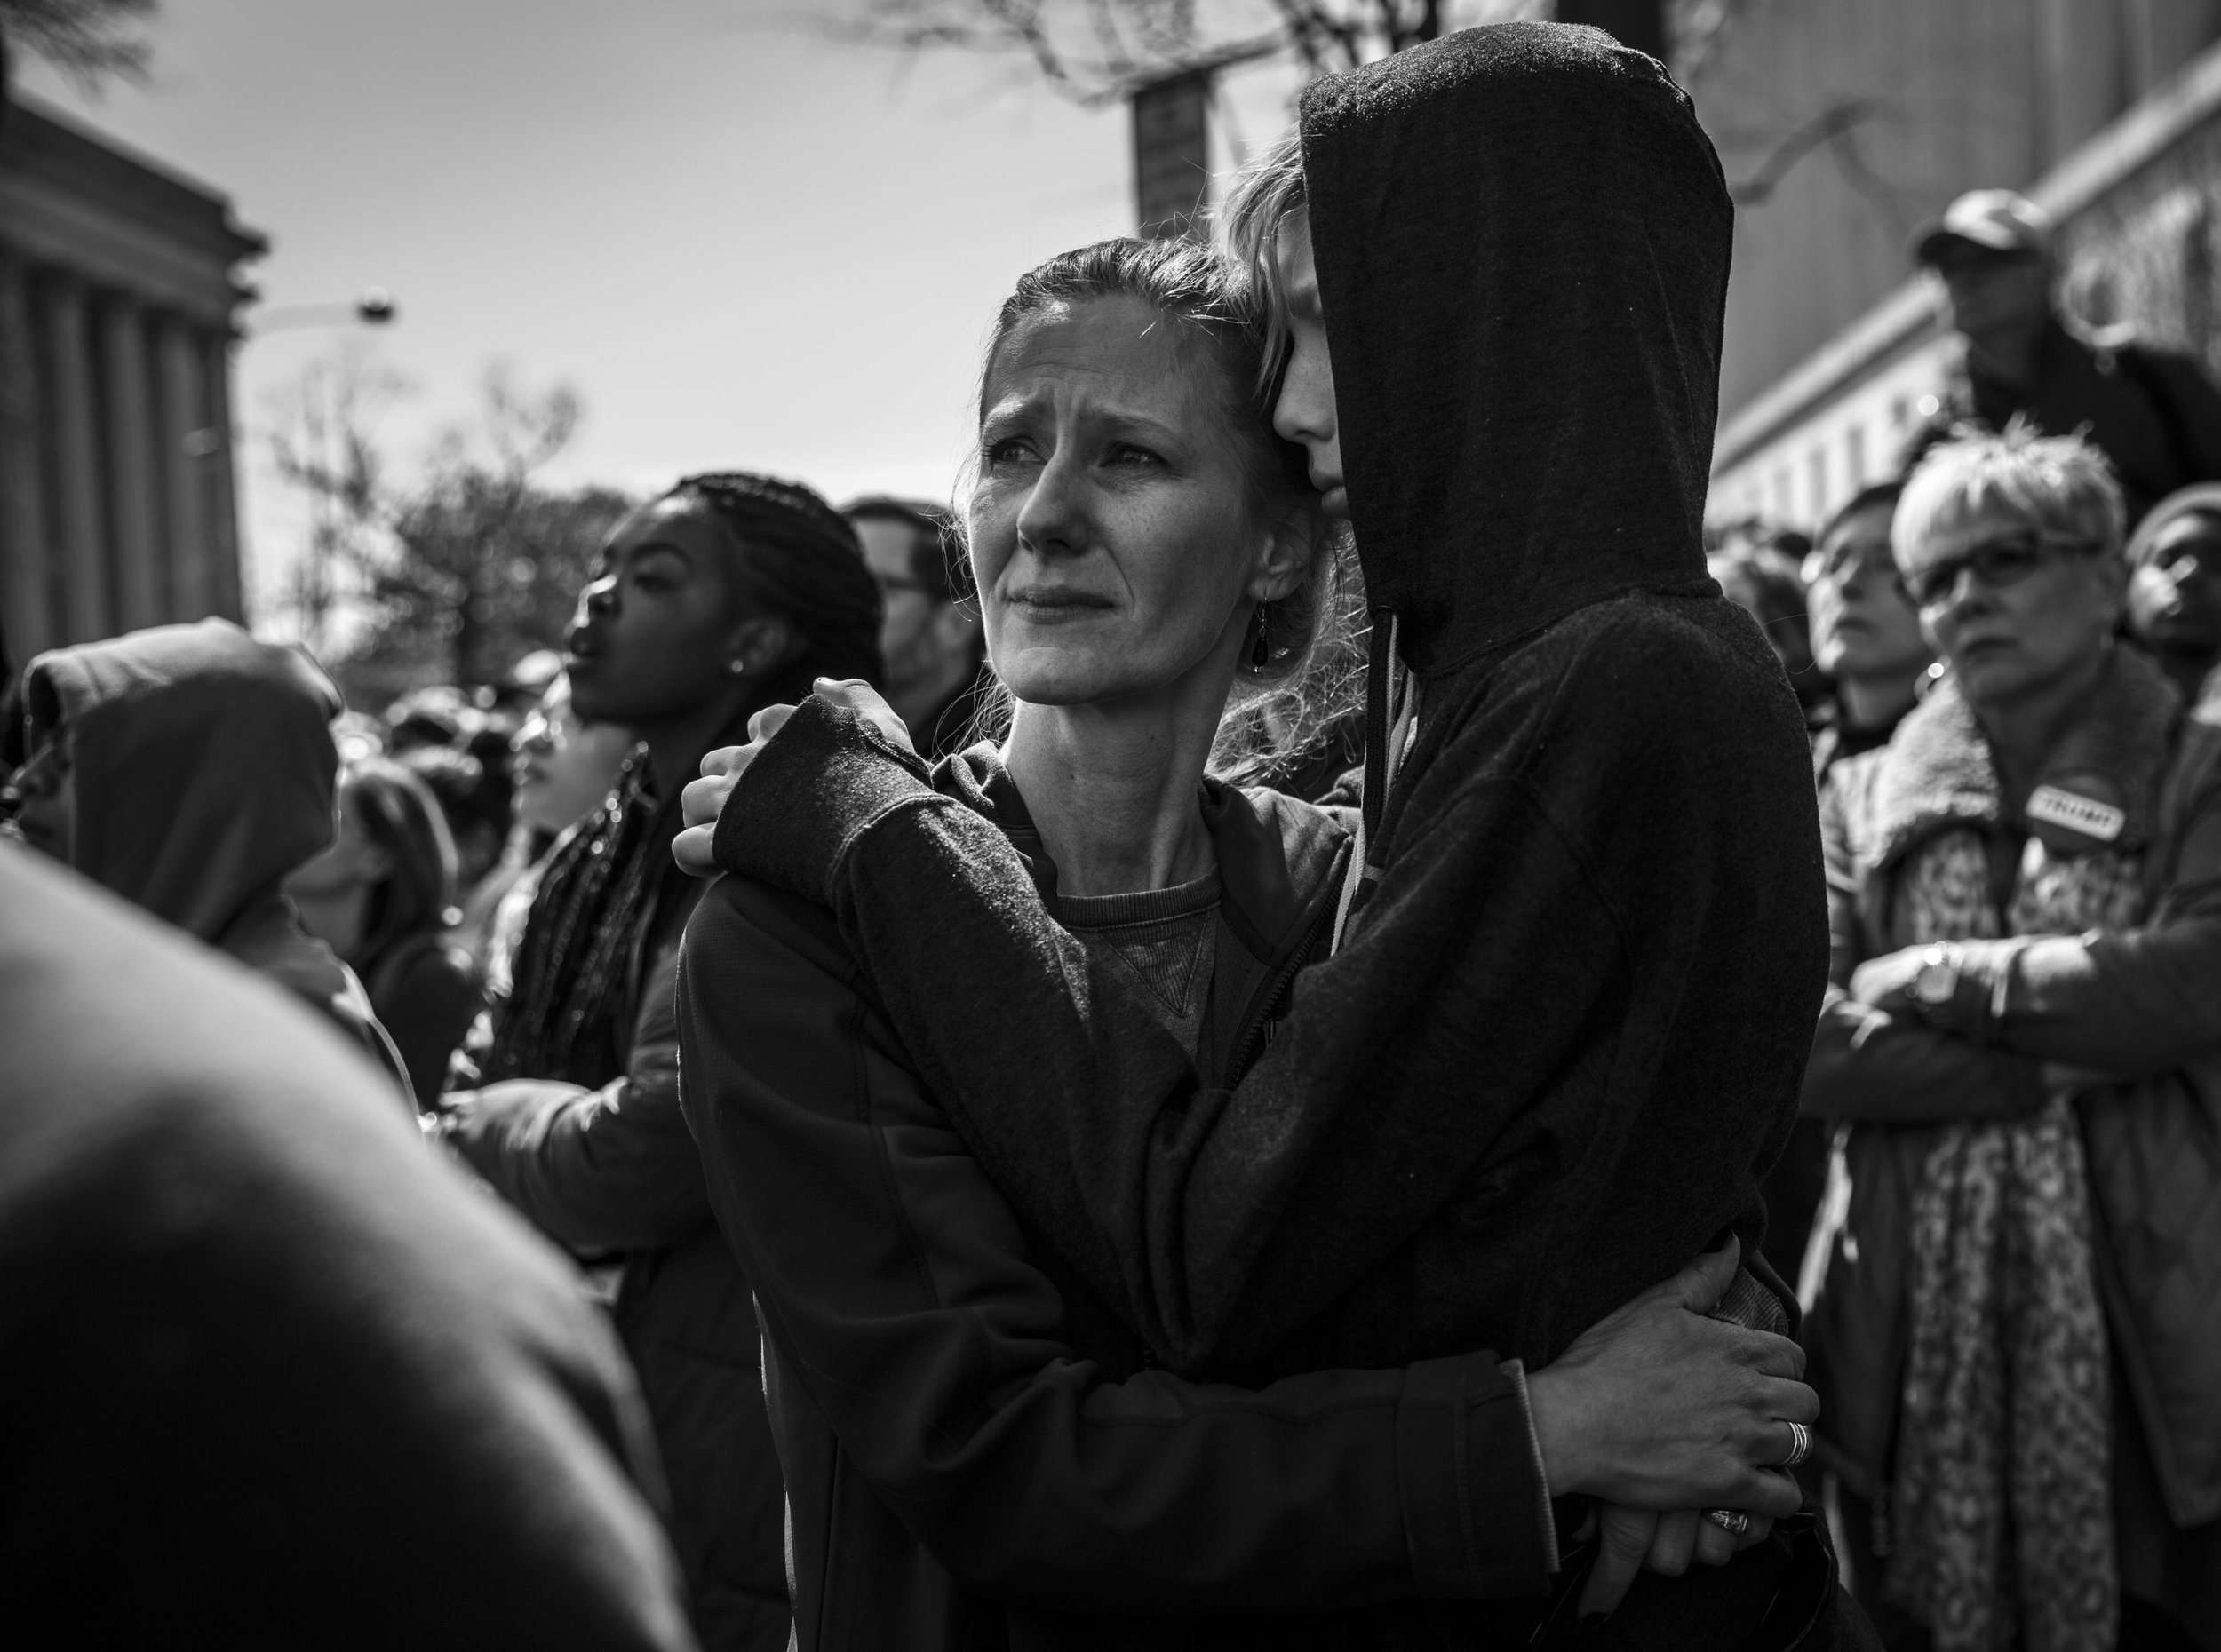   A woman embraces a child during the March For Our Lives in Washington, DC.  